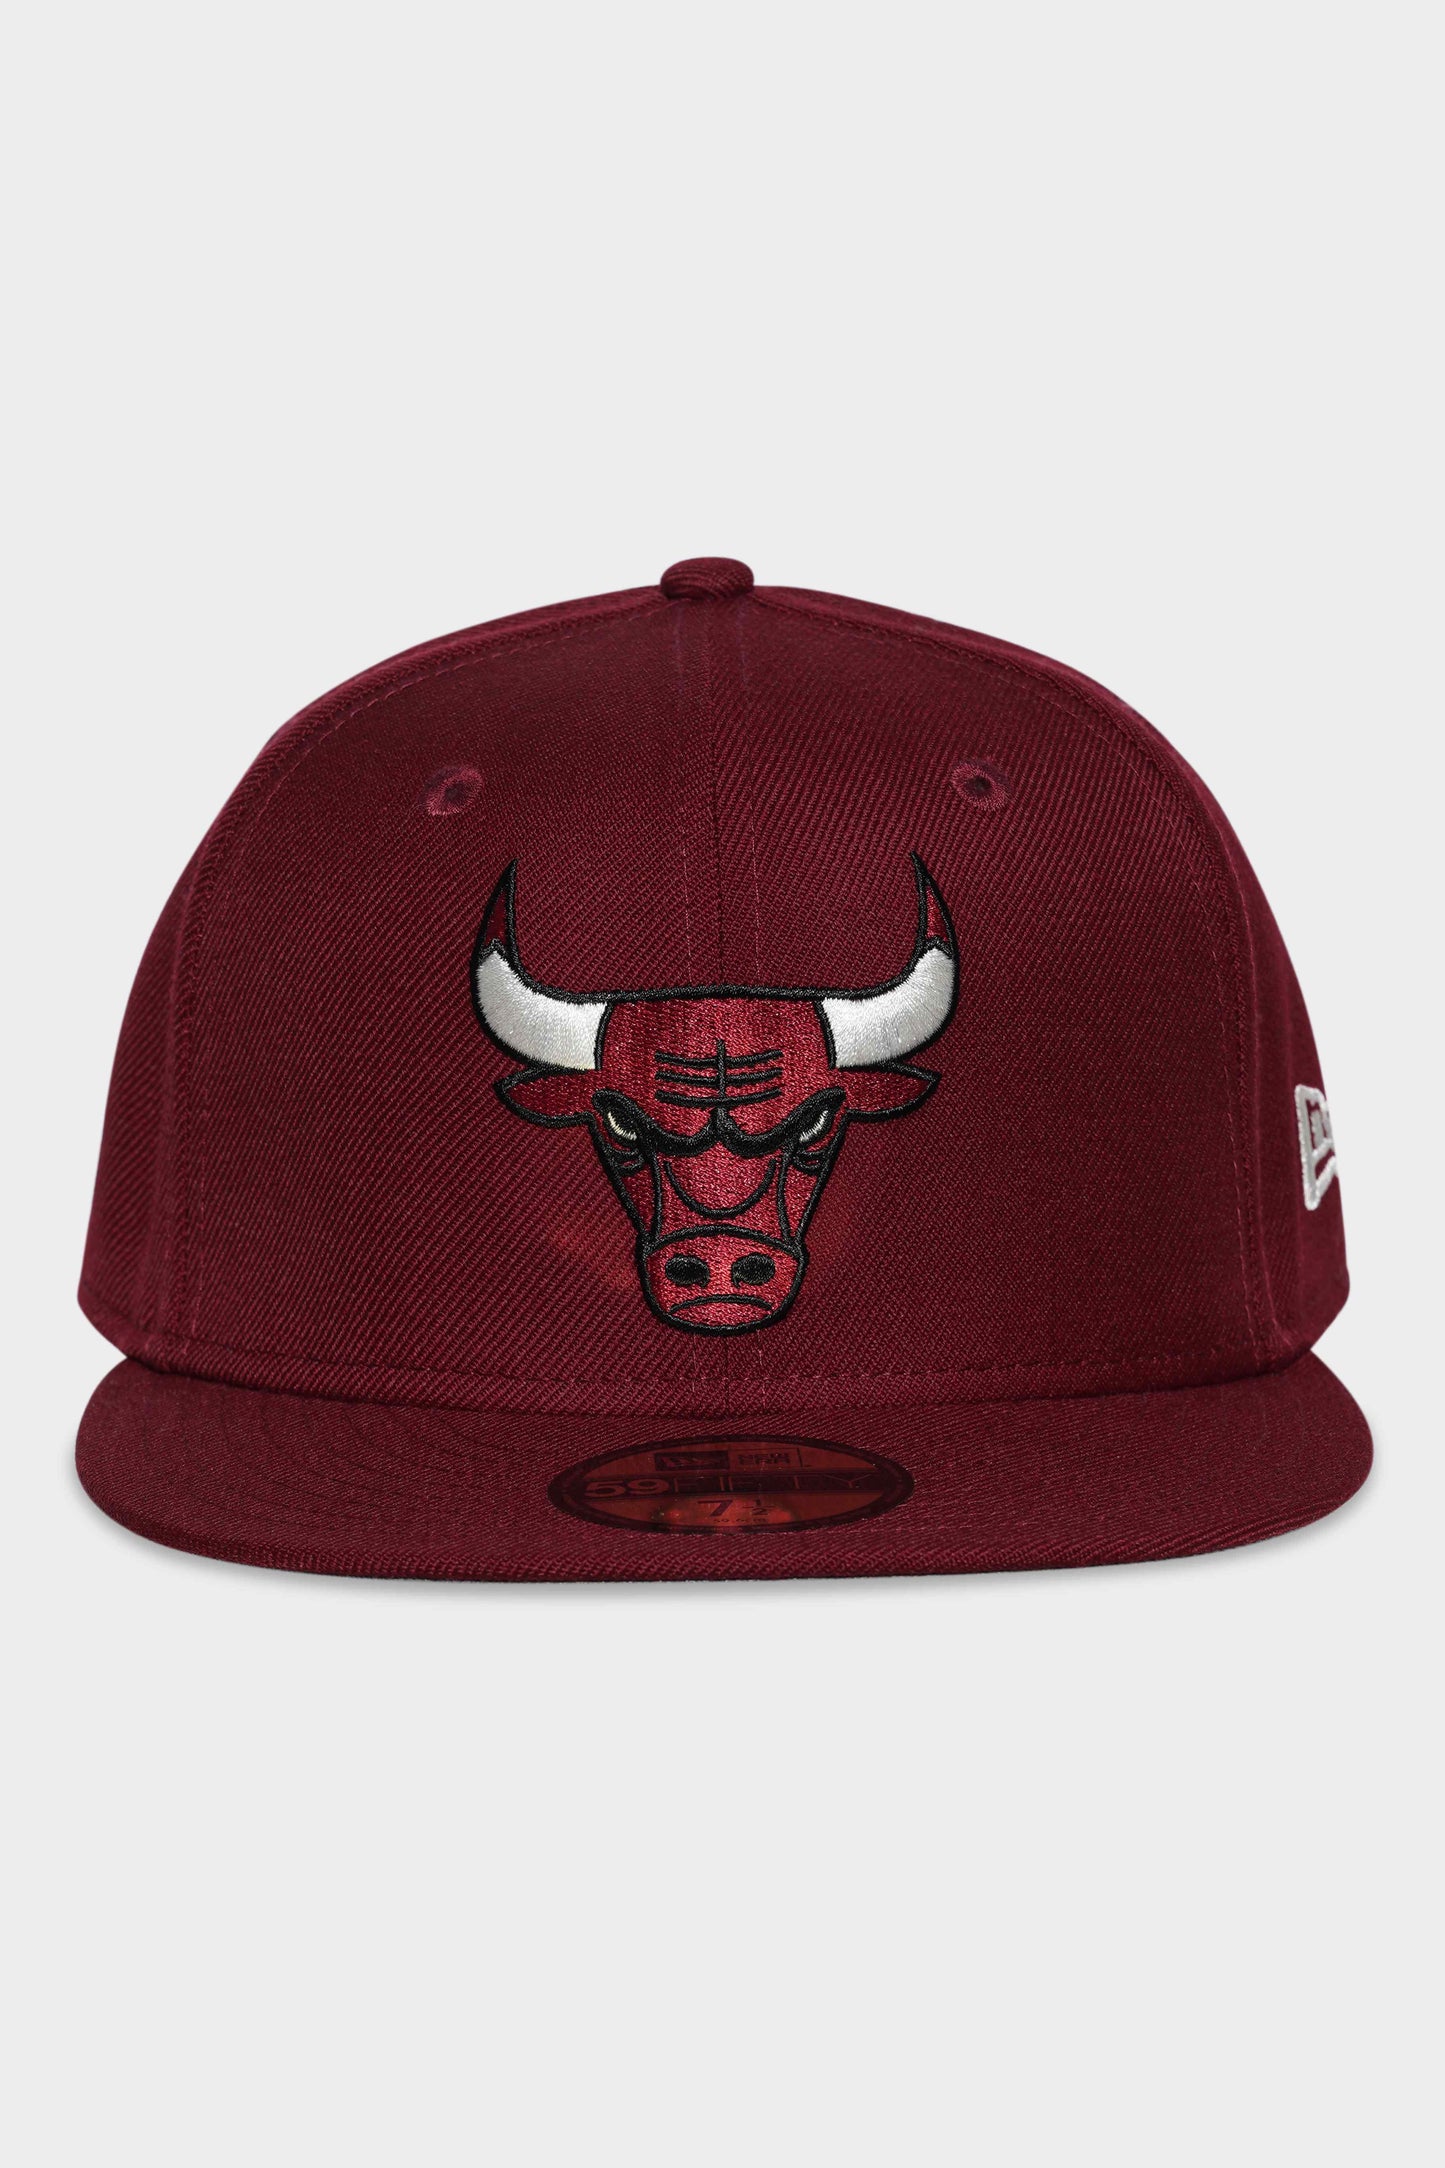 New Era 5950 Chicago Bulls Archive Mix Cardinal Fitted